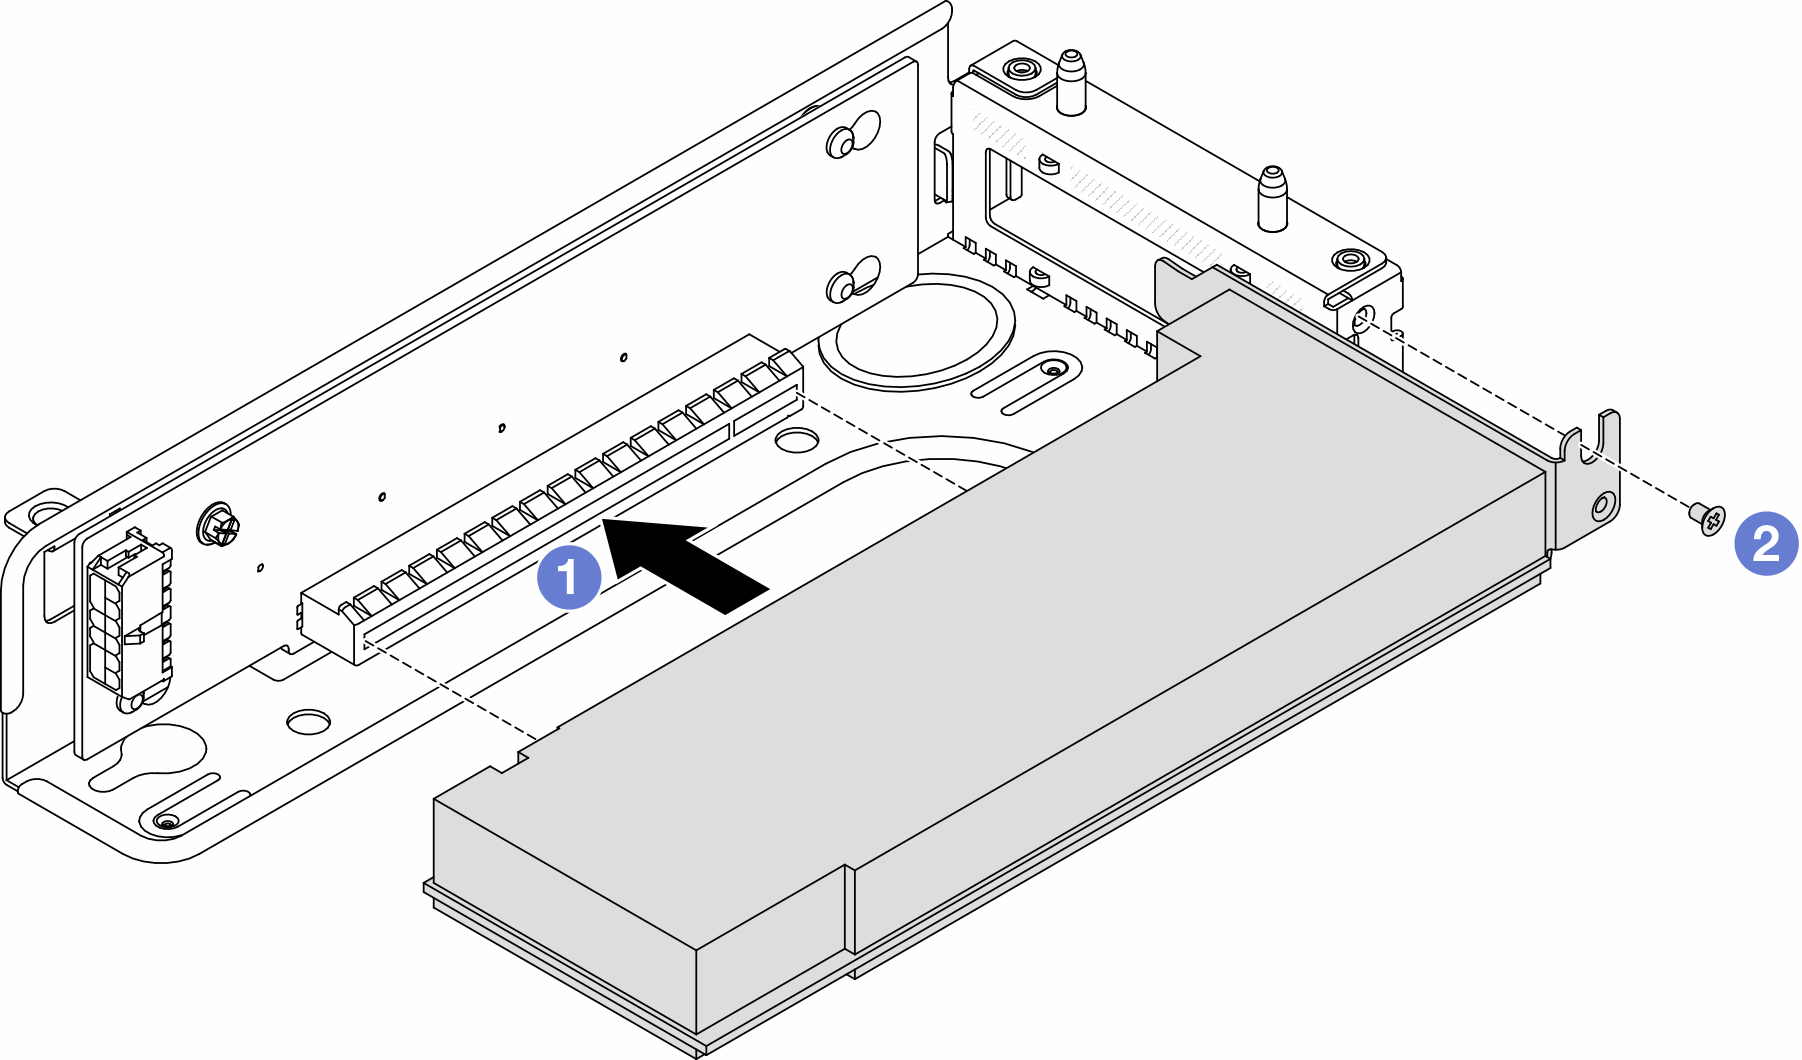 Installing PCIe adapters into the LP-FH riser assembly